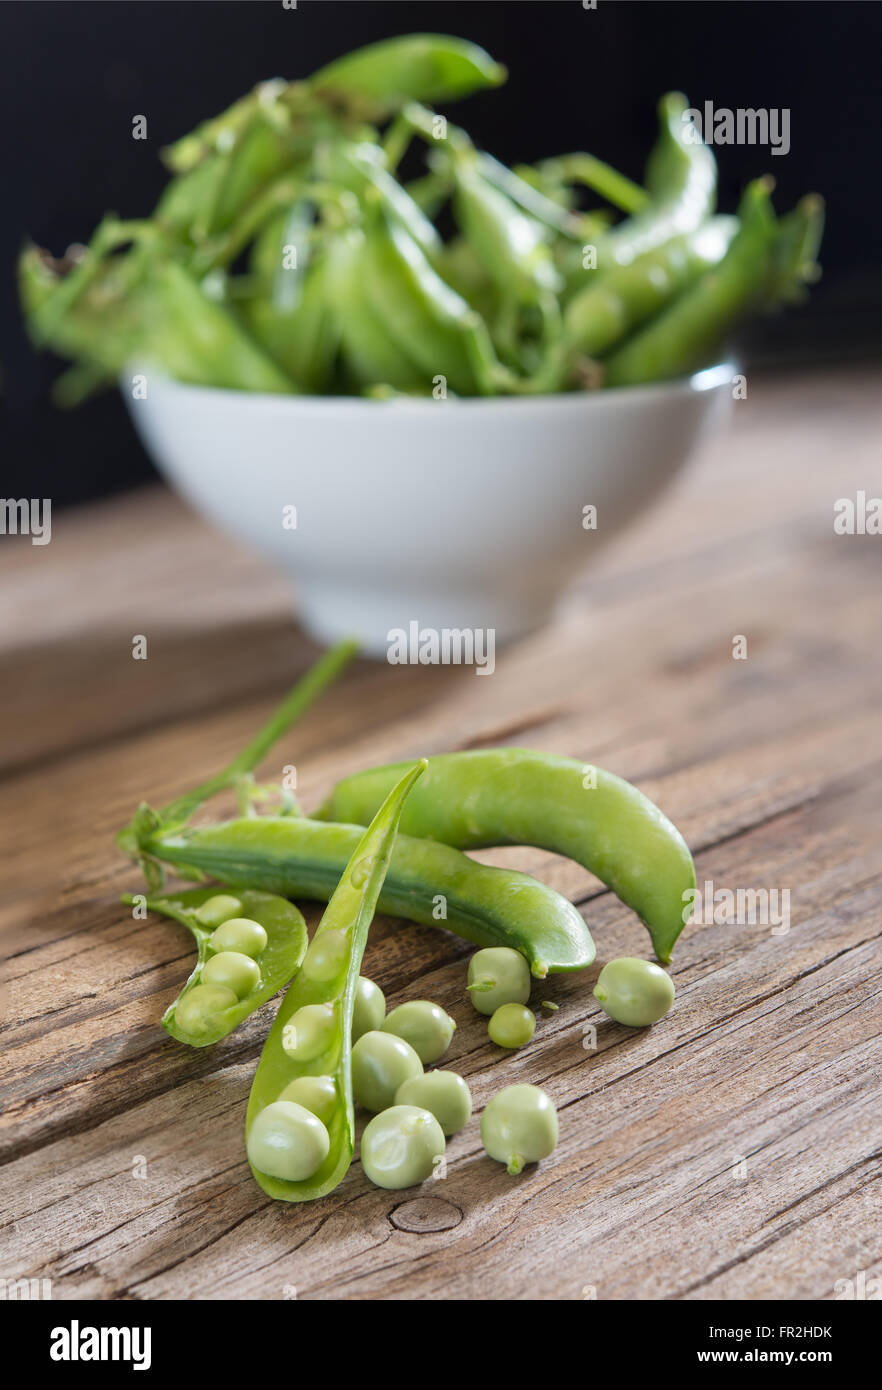 Fresh green peas on wooden table and black background Stock Photo